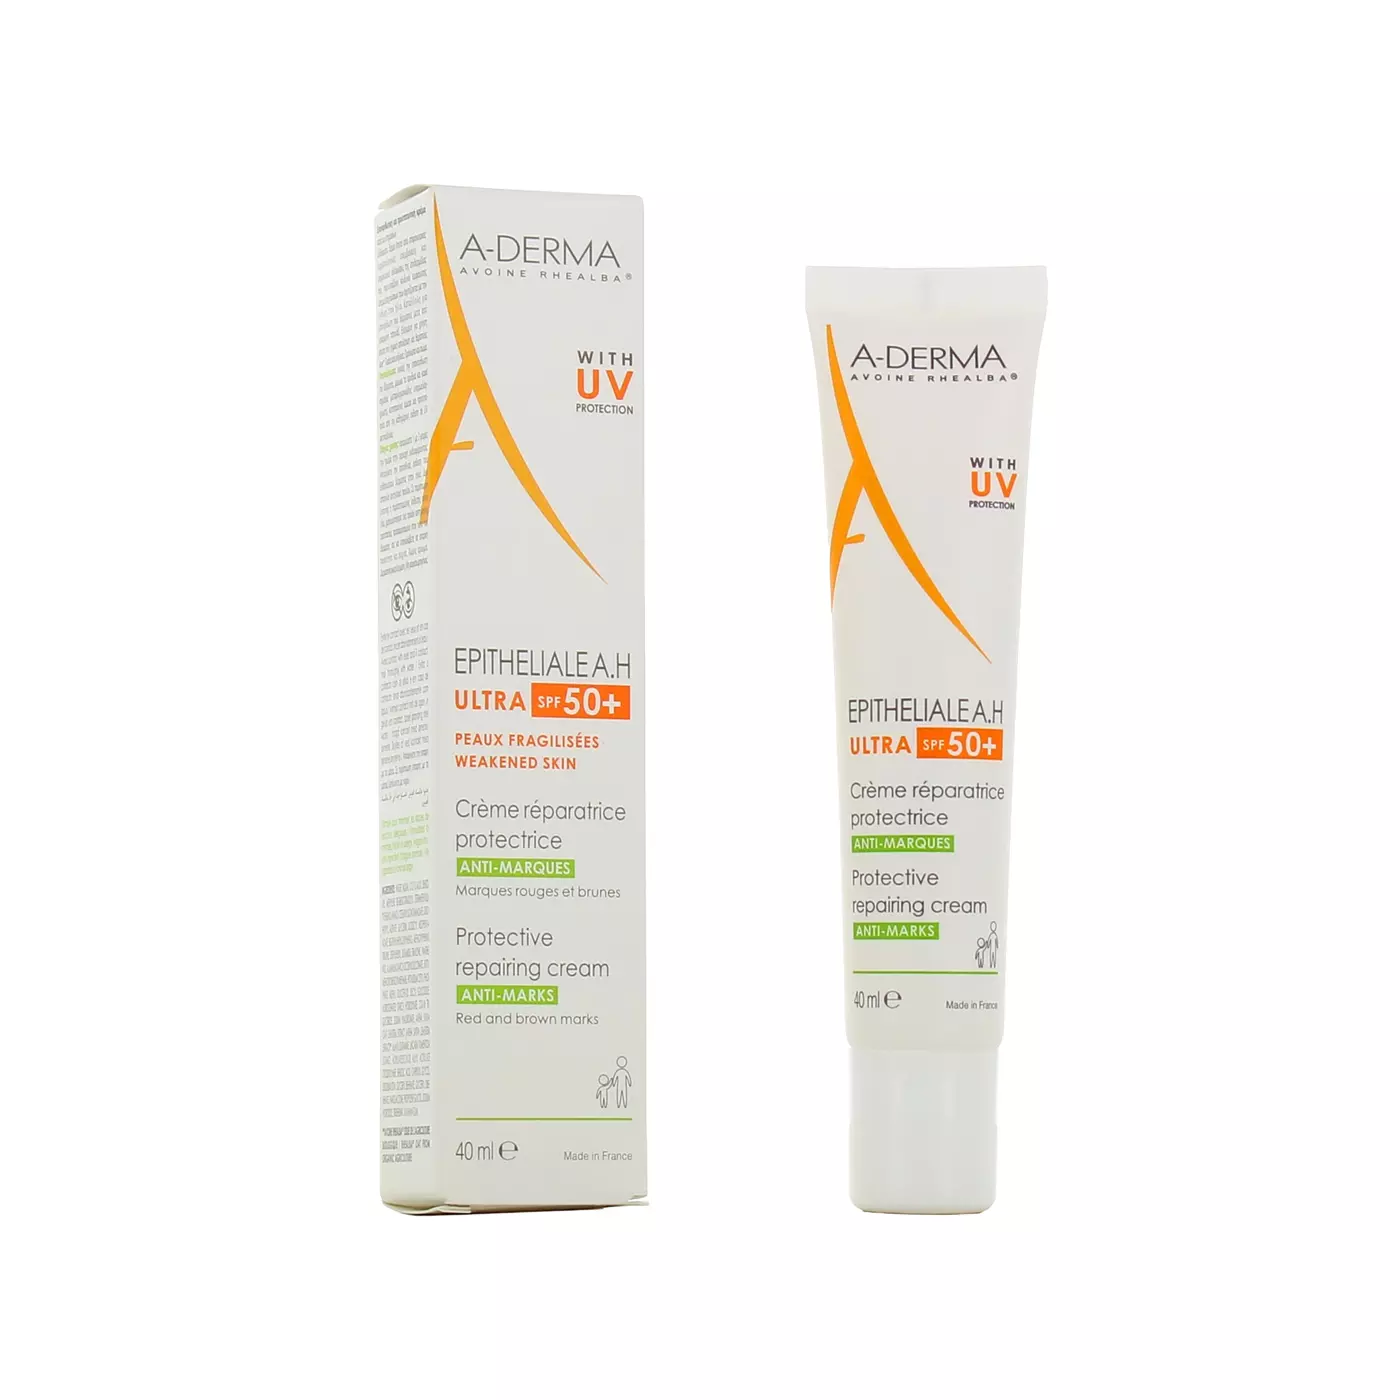 A-DERMA EPITHELIALE A.H ULTRA SPF50+ CREME REPARATRICE PROTECTRICE ANTI-MARQUES 40ML